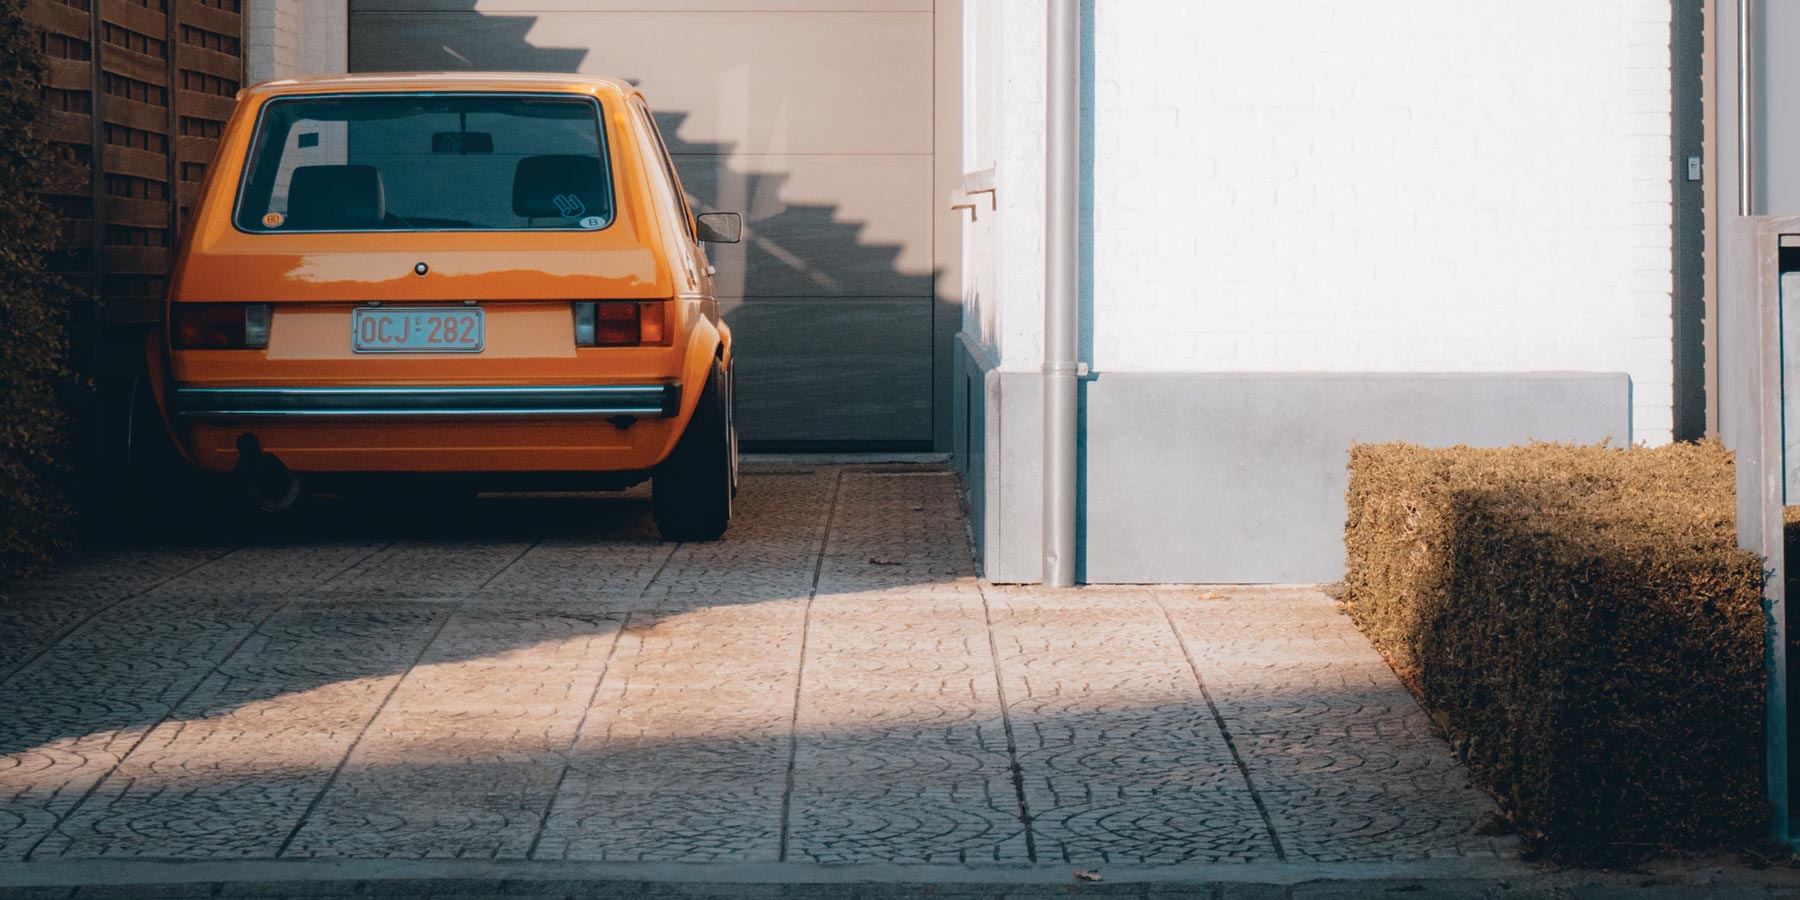 Clean home driveaway during sunset featuring a parked vintage yellow car.